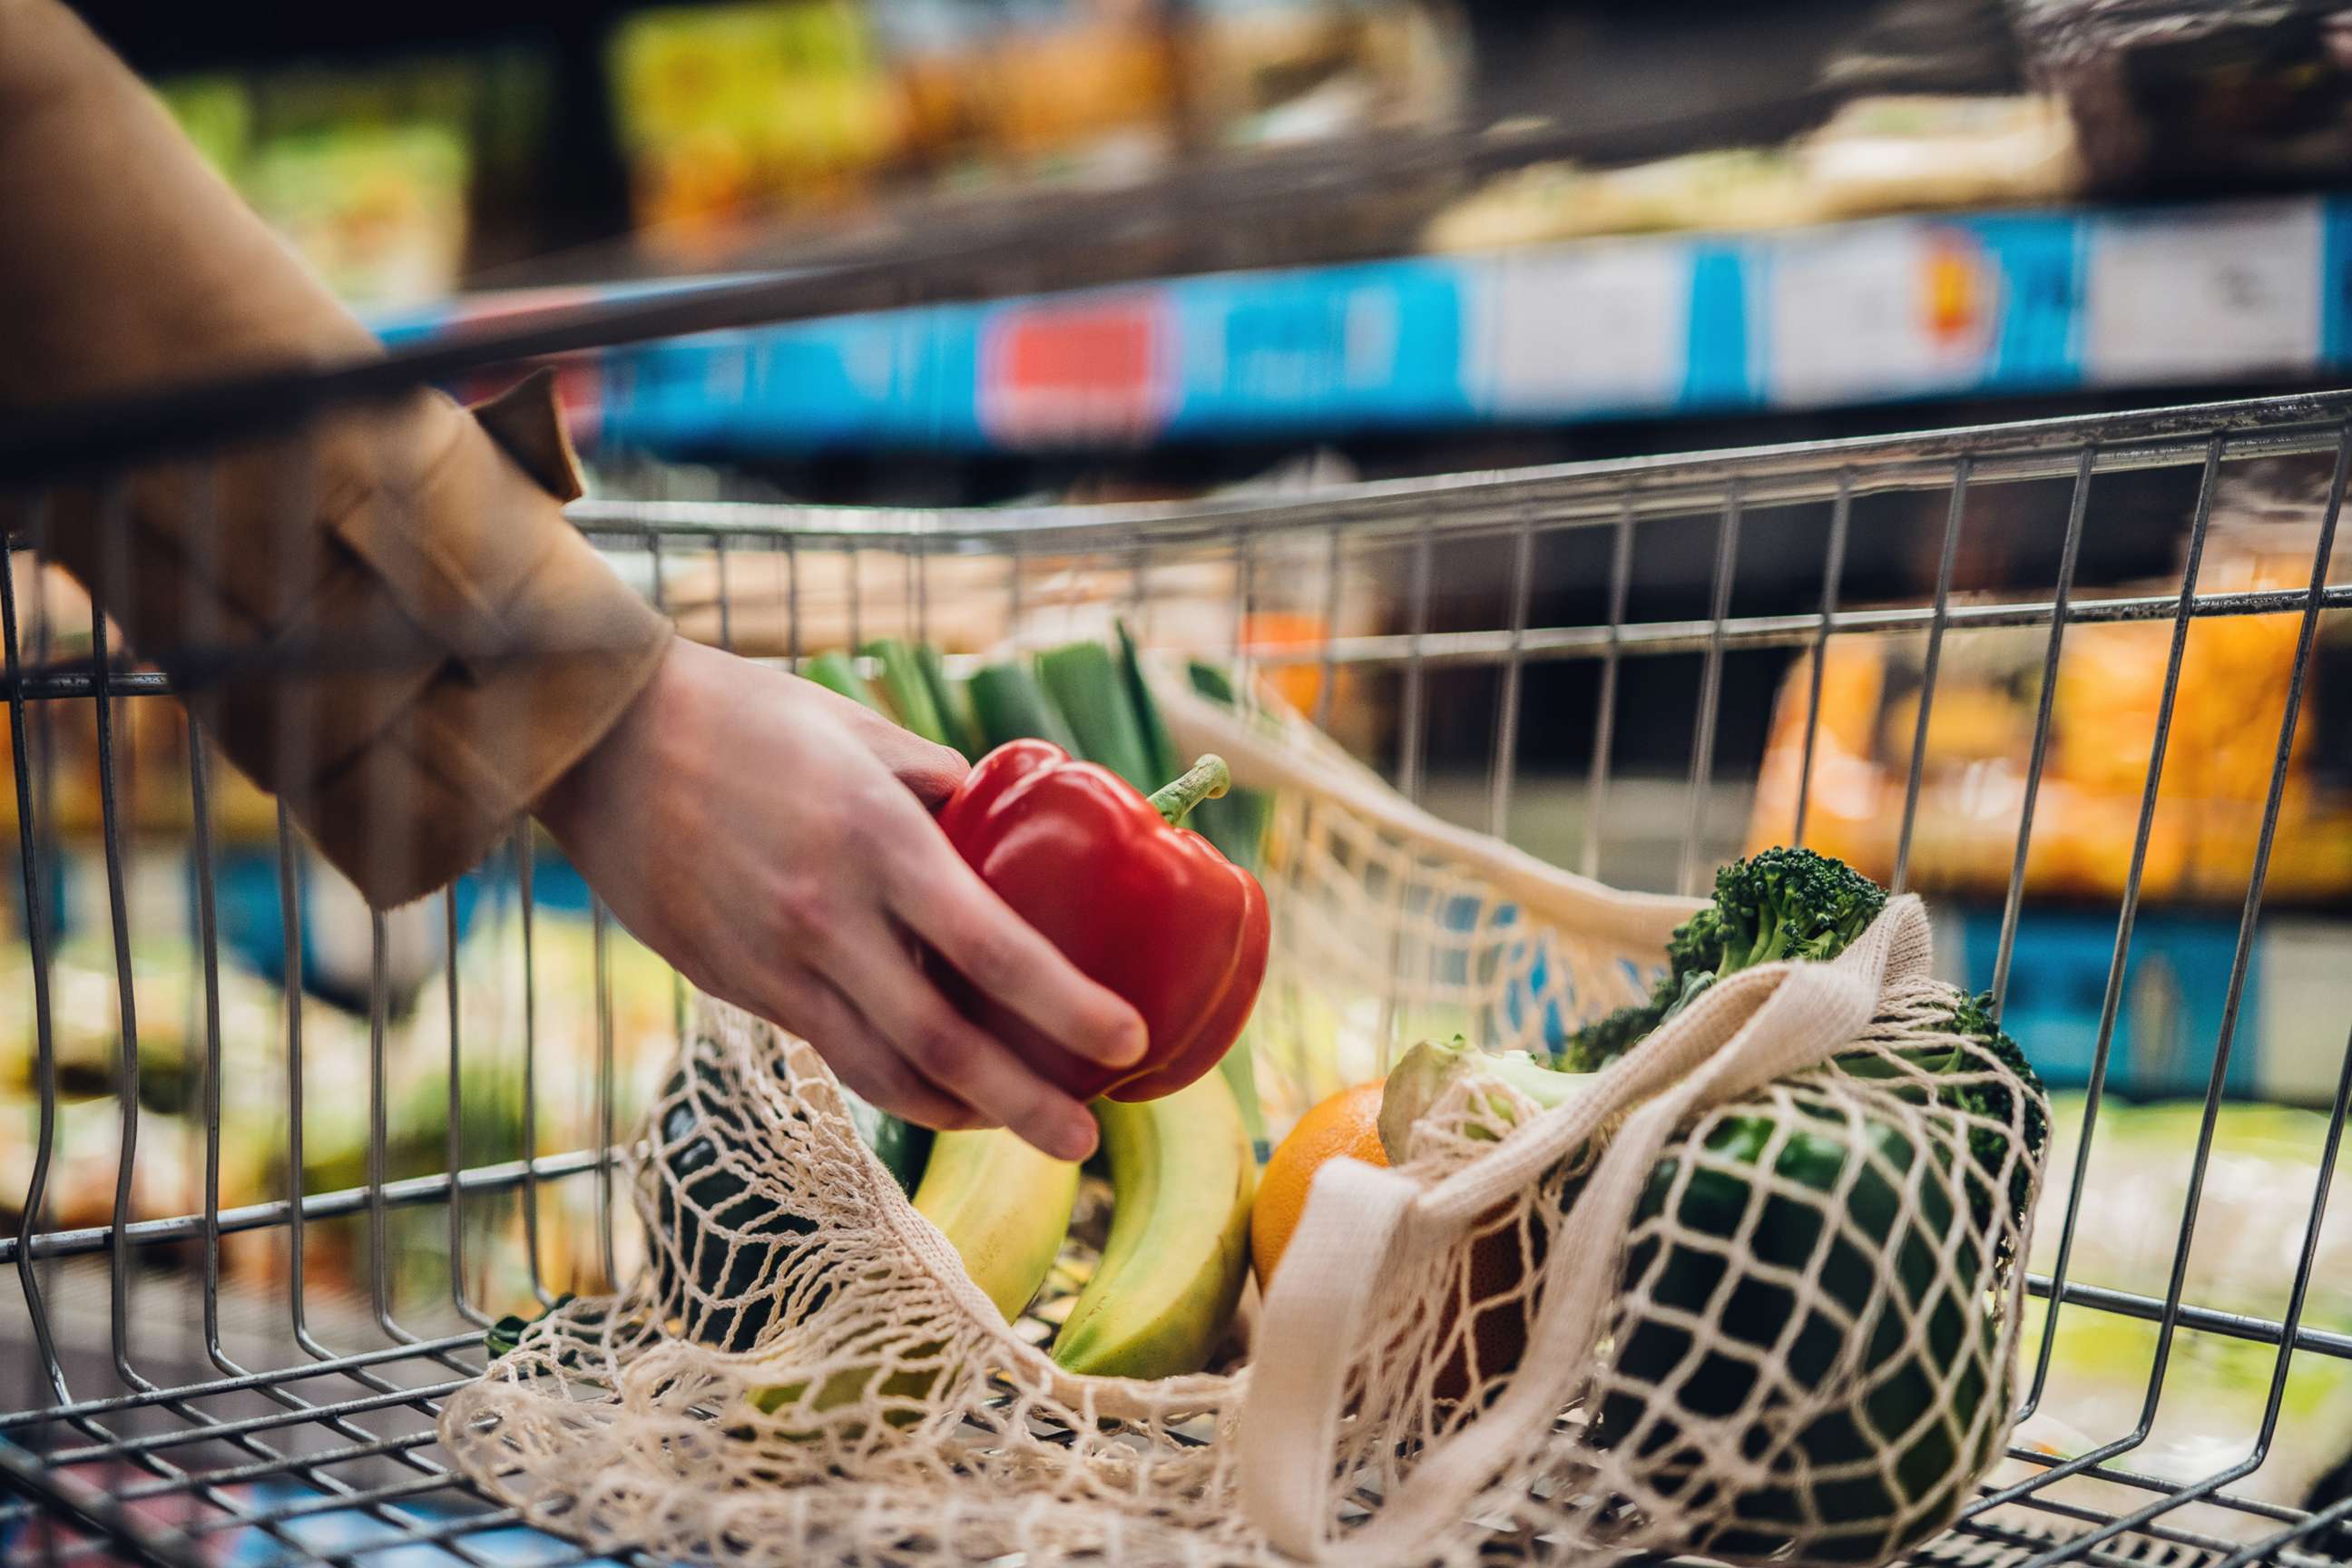 PHOTO: Fruits and vegetables are placed into a shopping cart in an undated stock image.